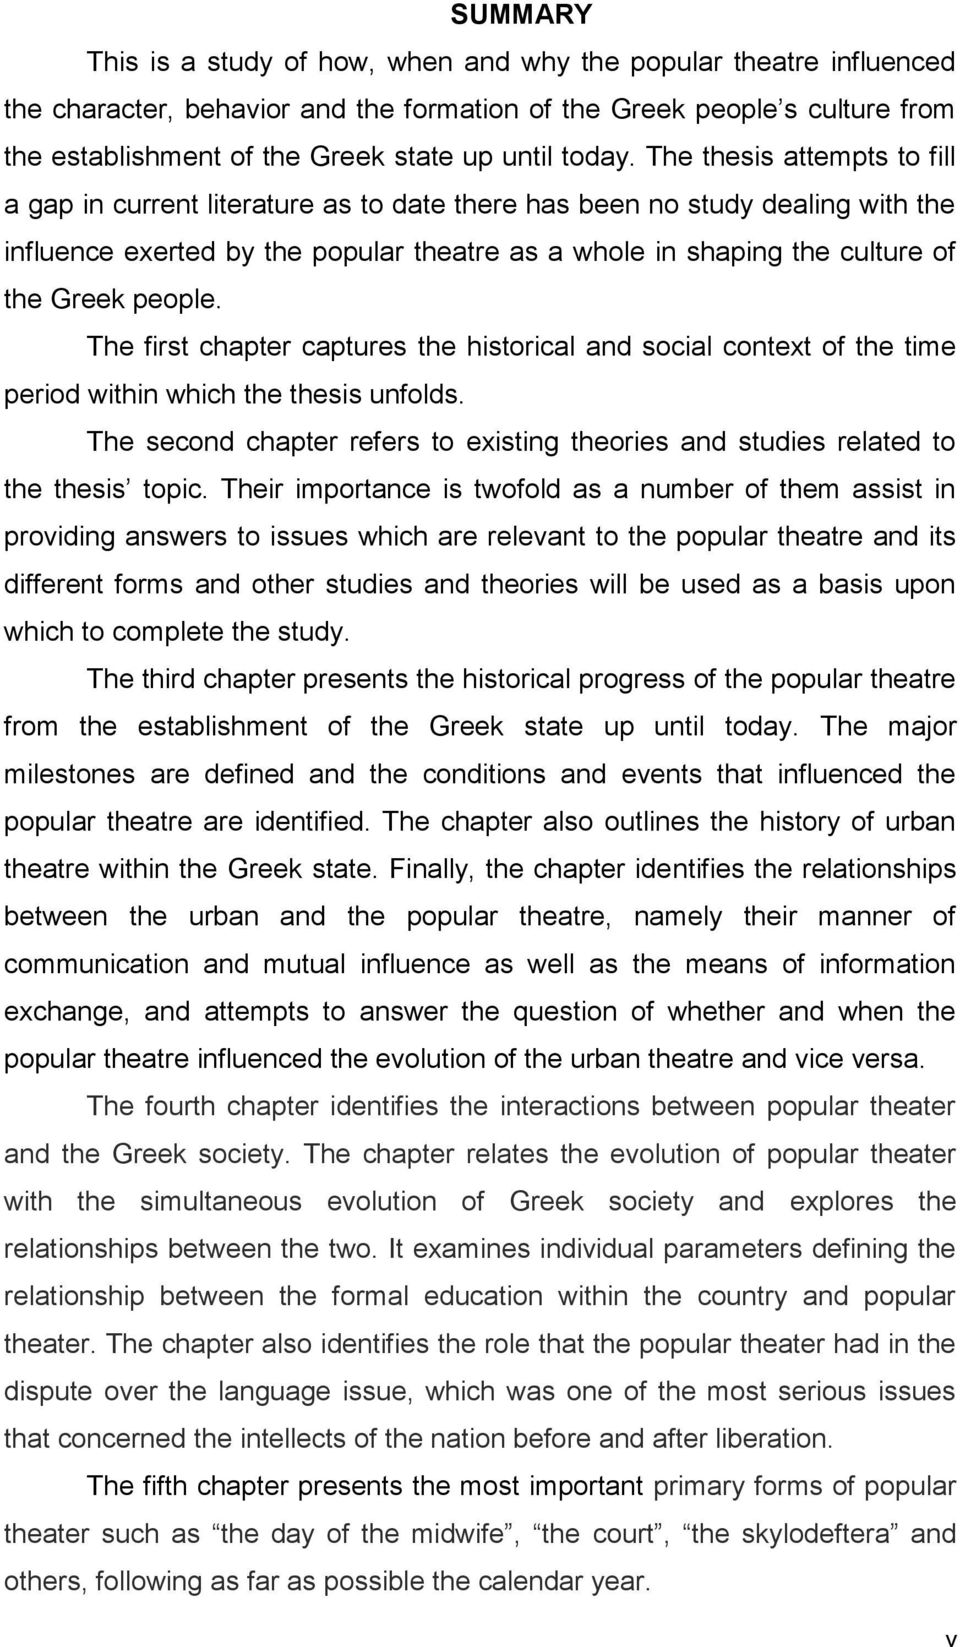 The thesis attempts to fill a gap in current literature as to date there has been no study dealing with the influence exerted by the popular theatre as a whole in shaping the culture of the Greek